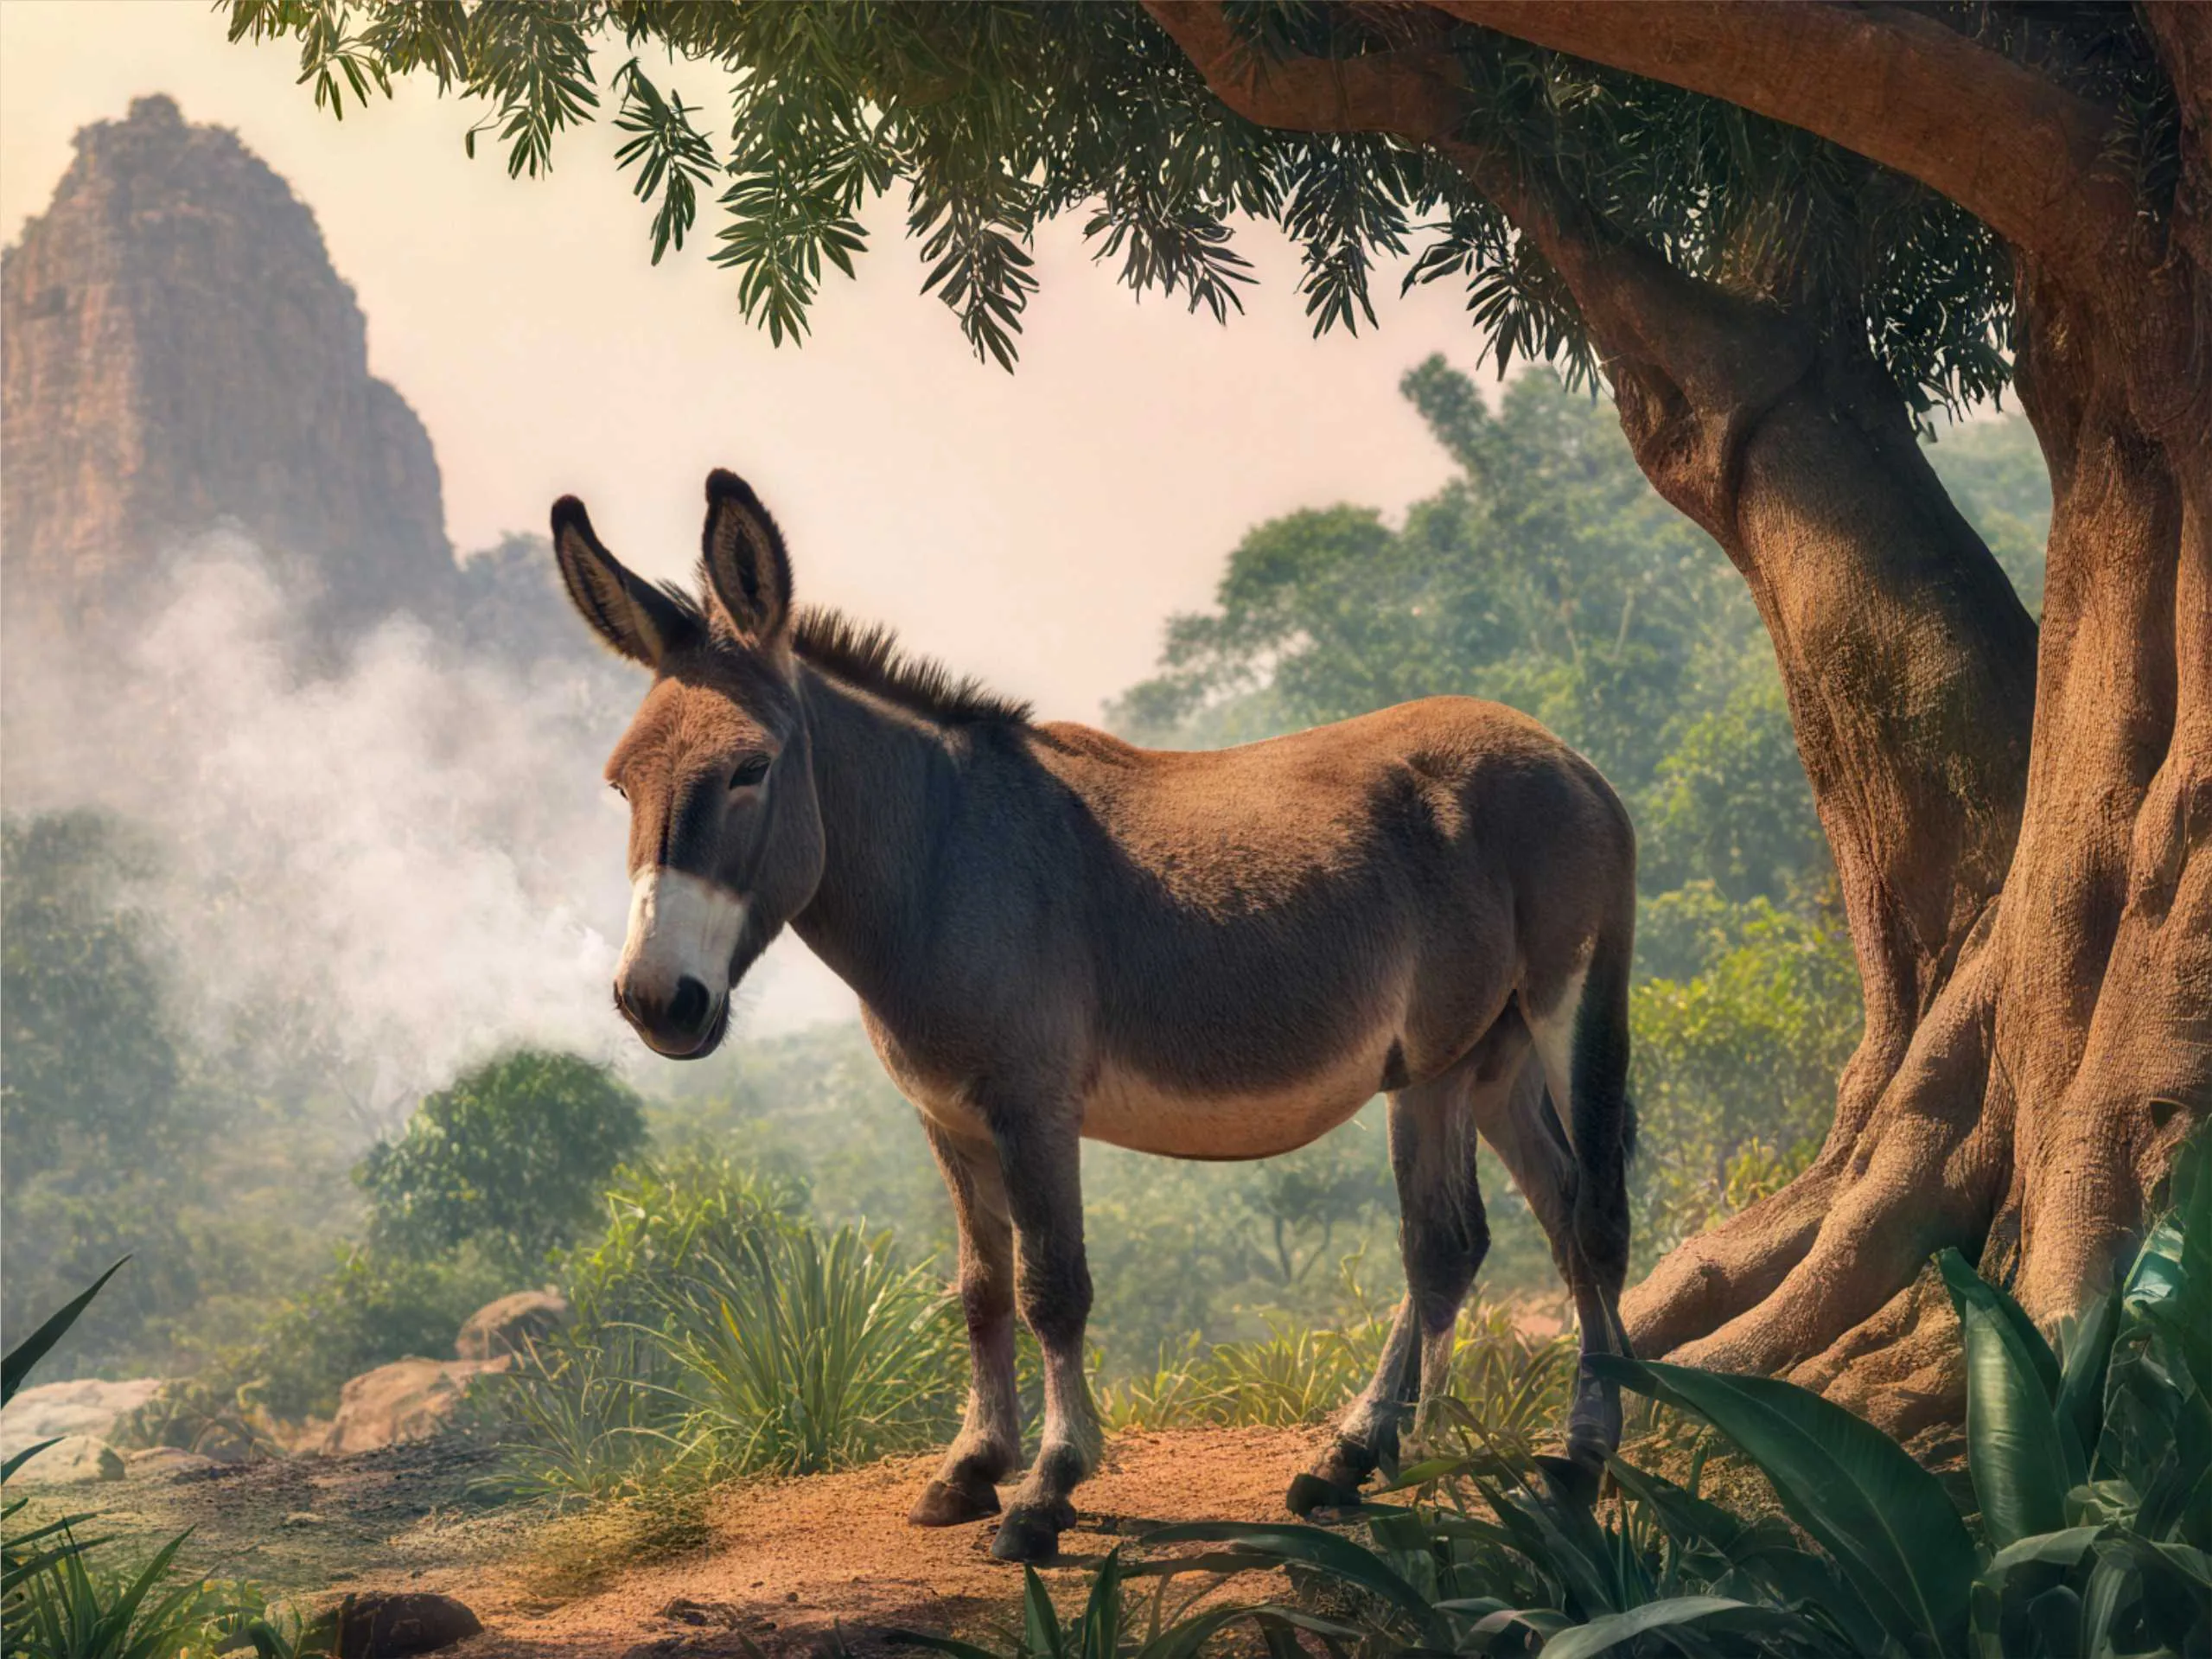 Cartoon image of a donkey in jungle